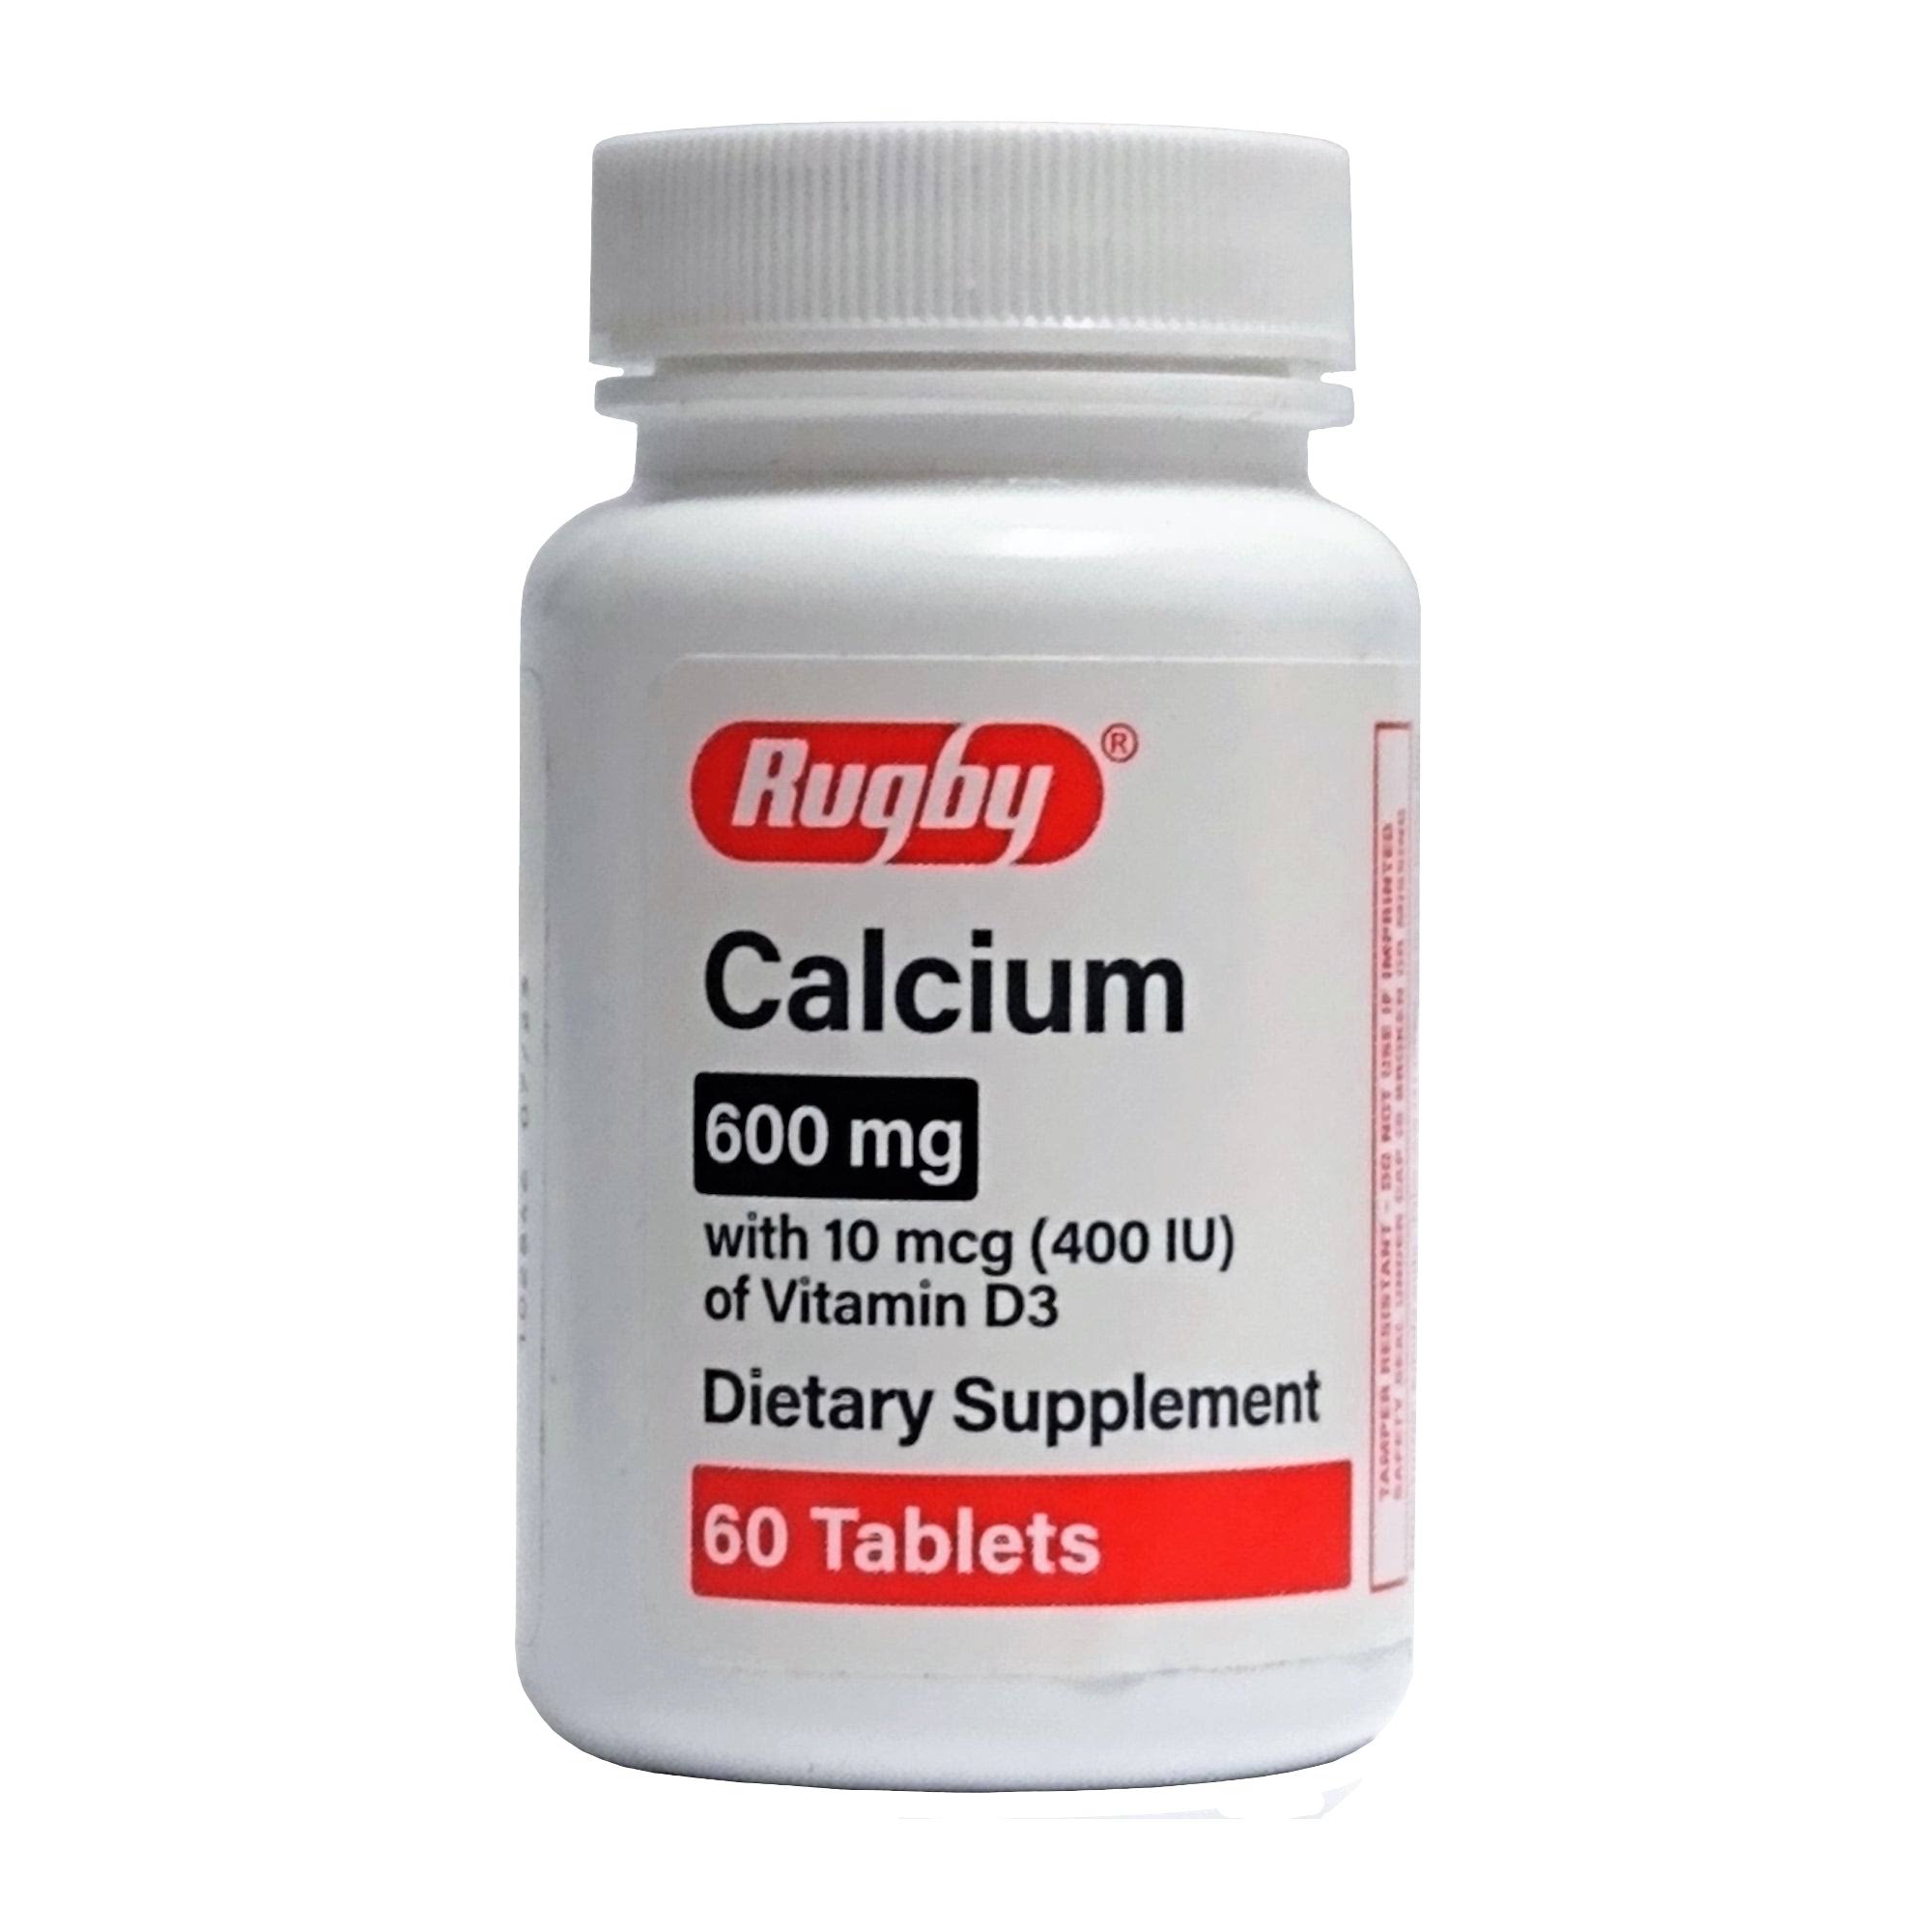 Rugby Calcium, 600 mg, Tablets - 60 ea